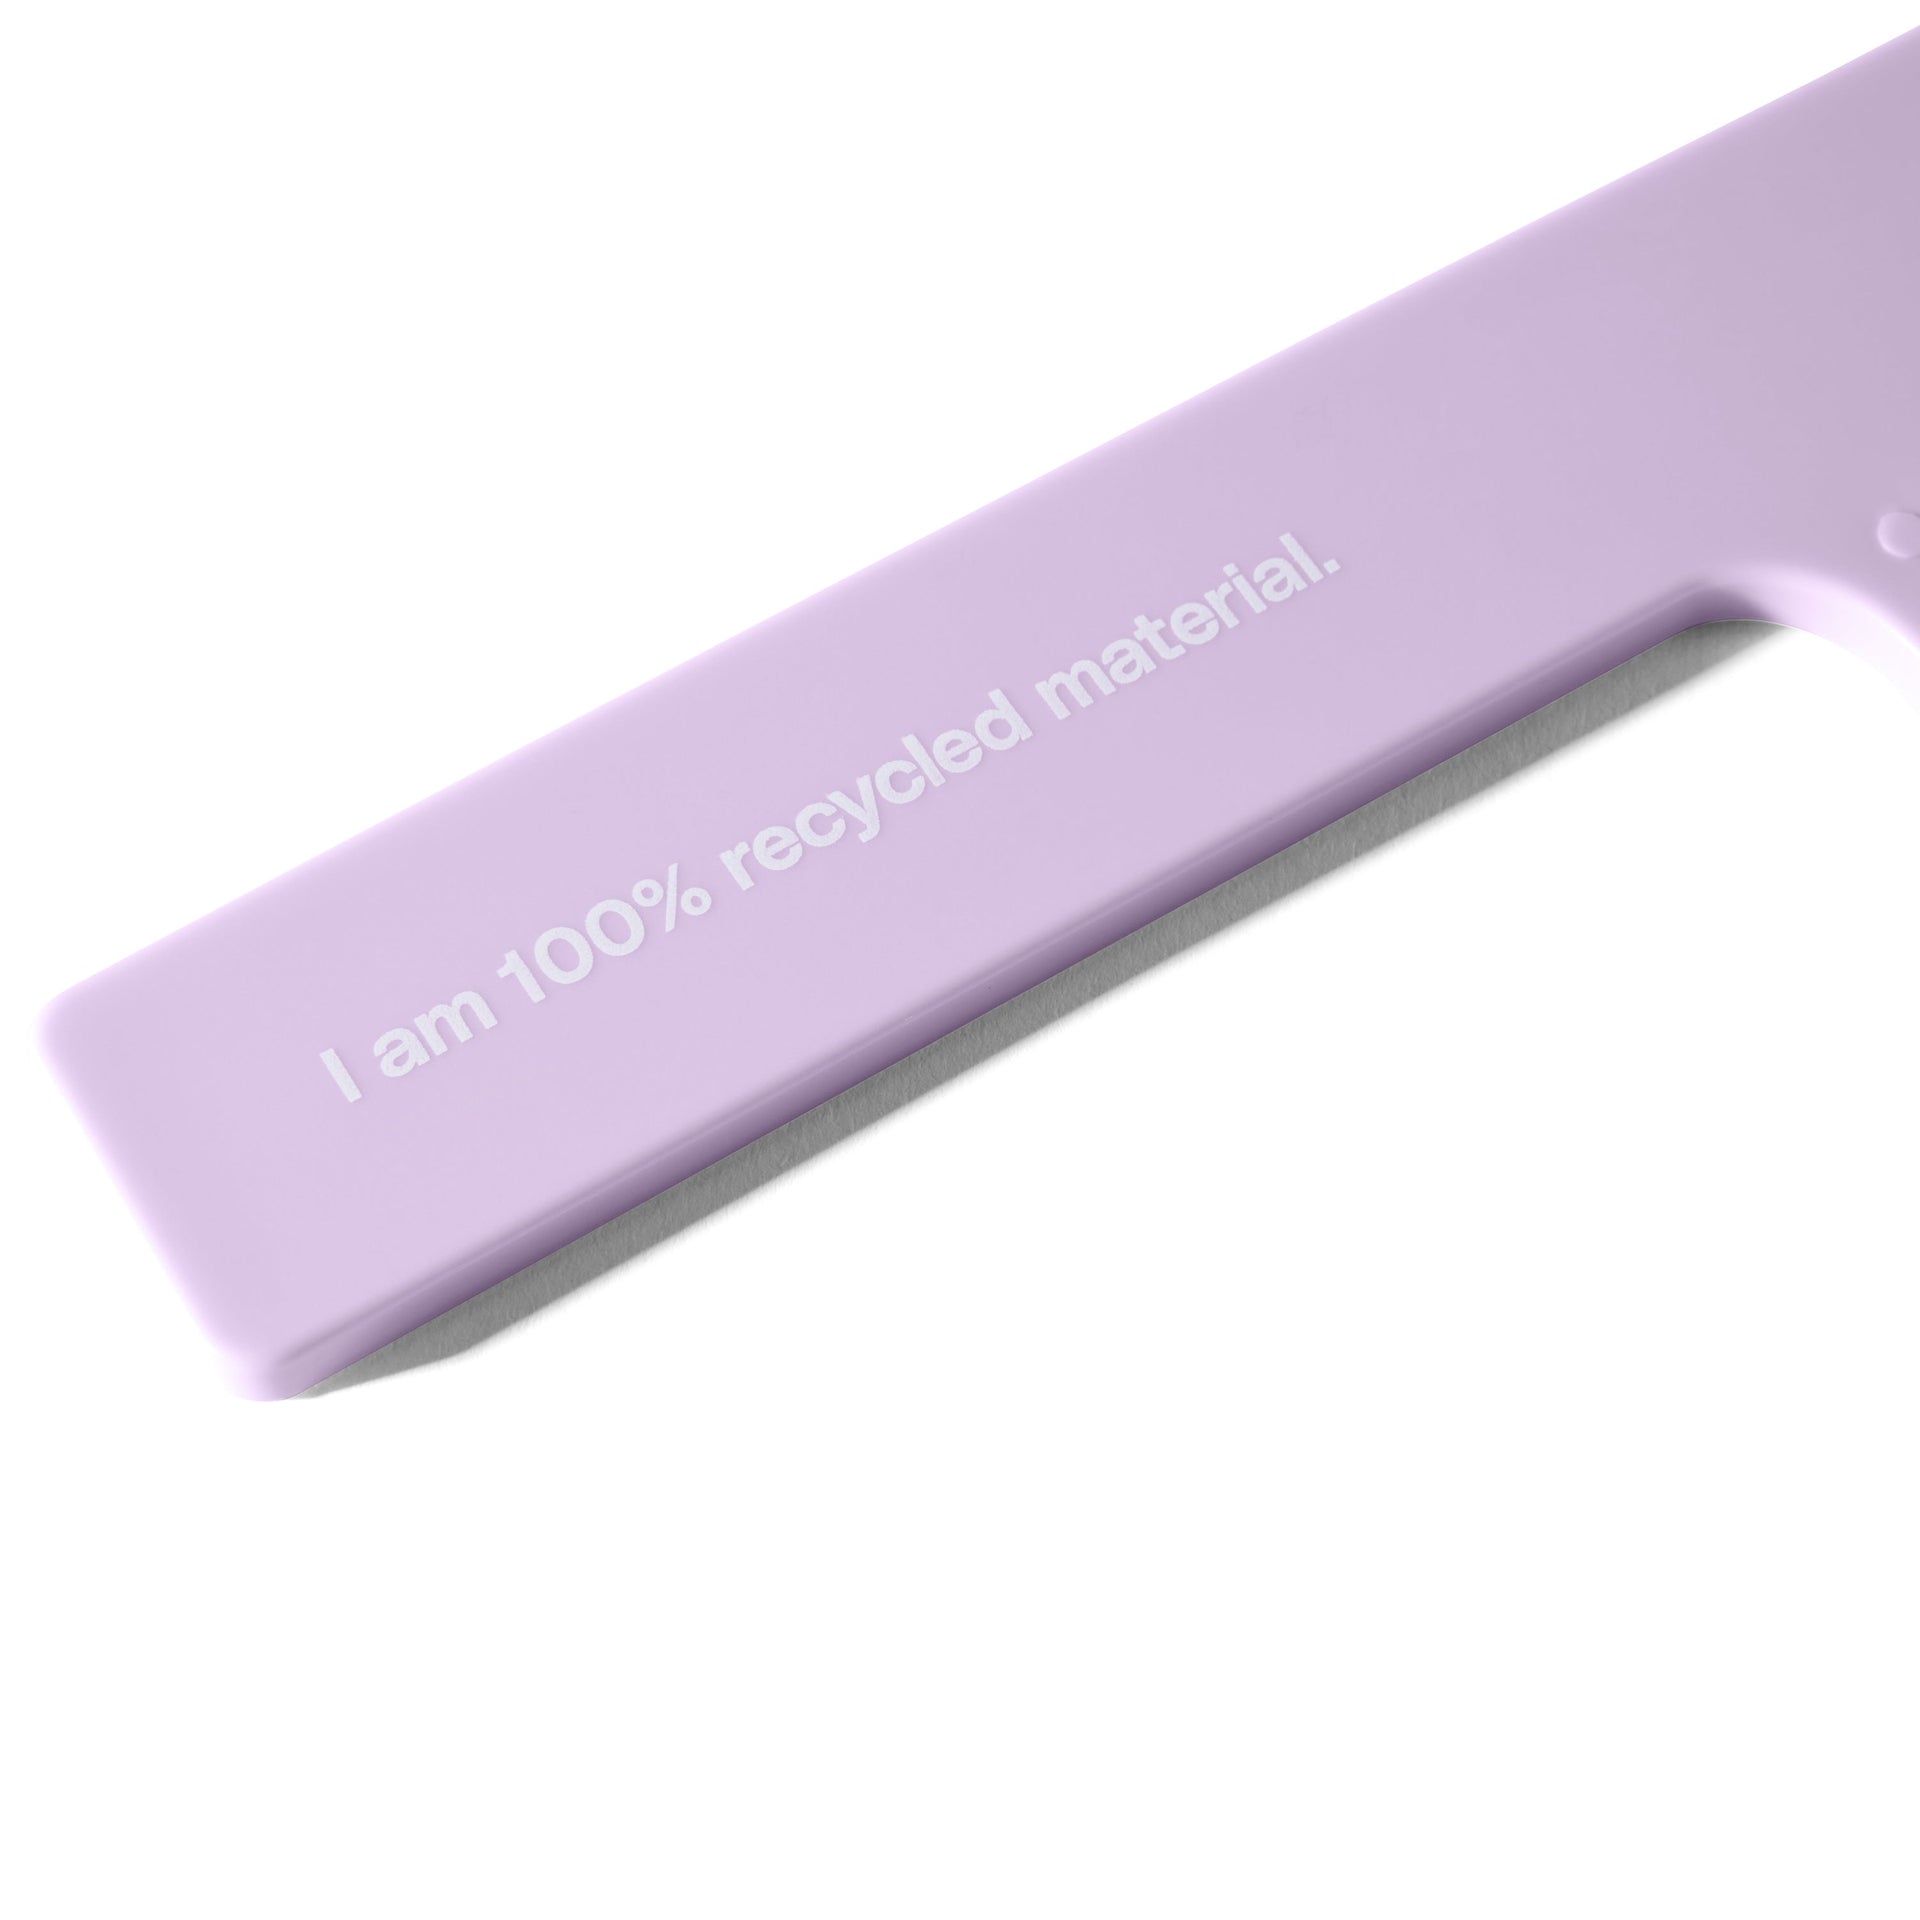 mane not ur average wide-tooth comb in purple handle